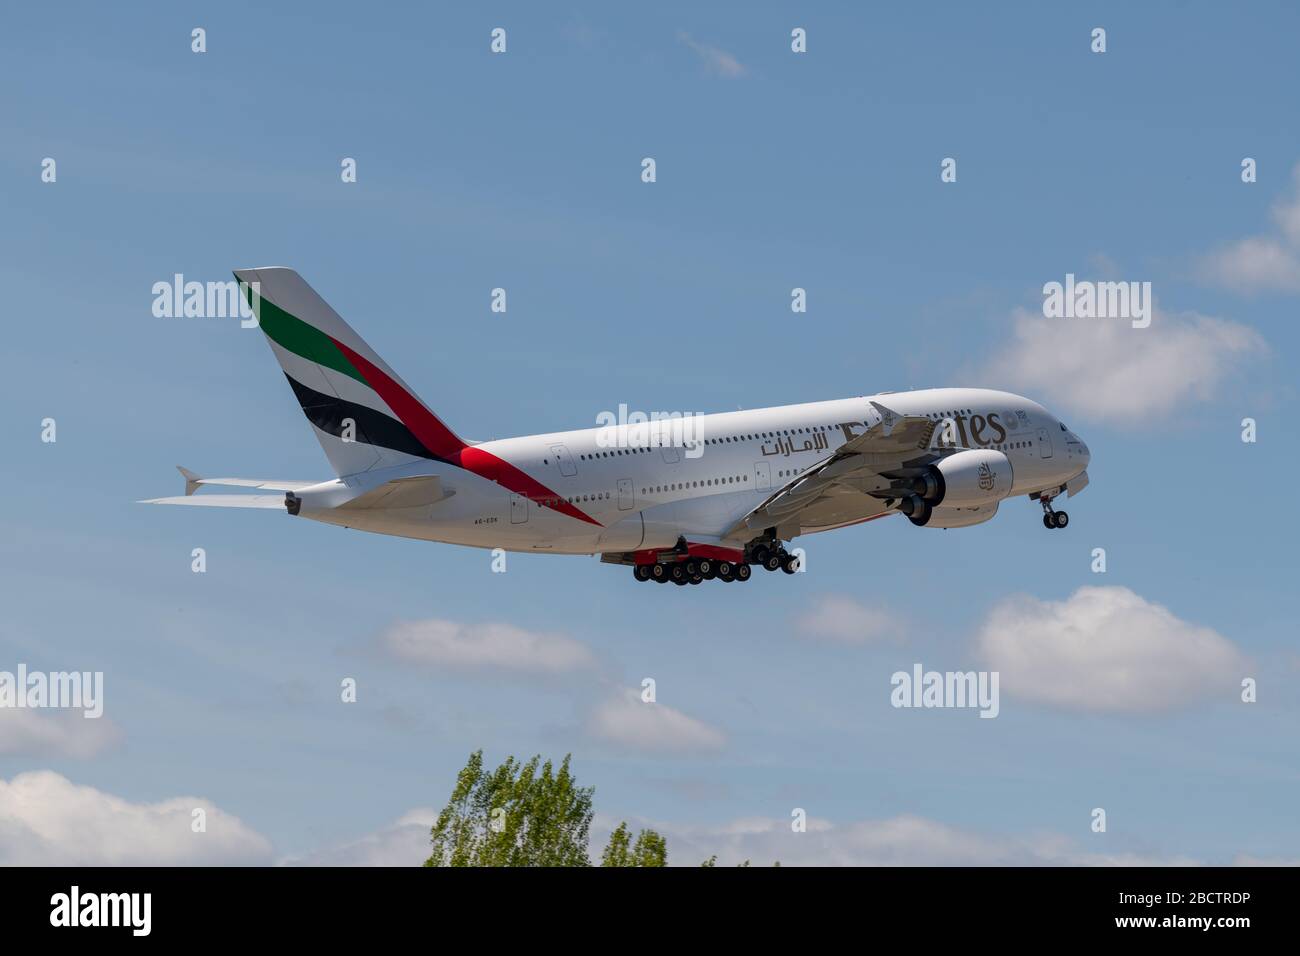 MADRID, SPAIN - 14 APRIL 2019: Emirates Airbus A380 passenger plane takes off from the Adolfo Suarez International Airport of Madrid-Barajas, in a blu Stock Photo